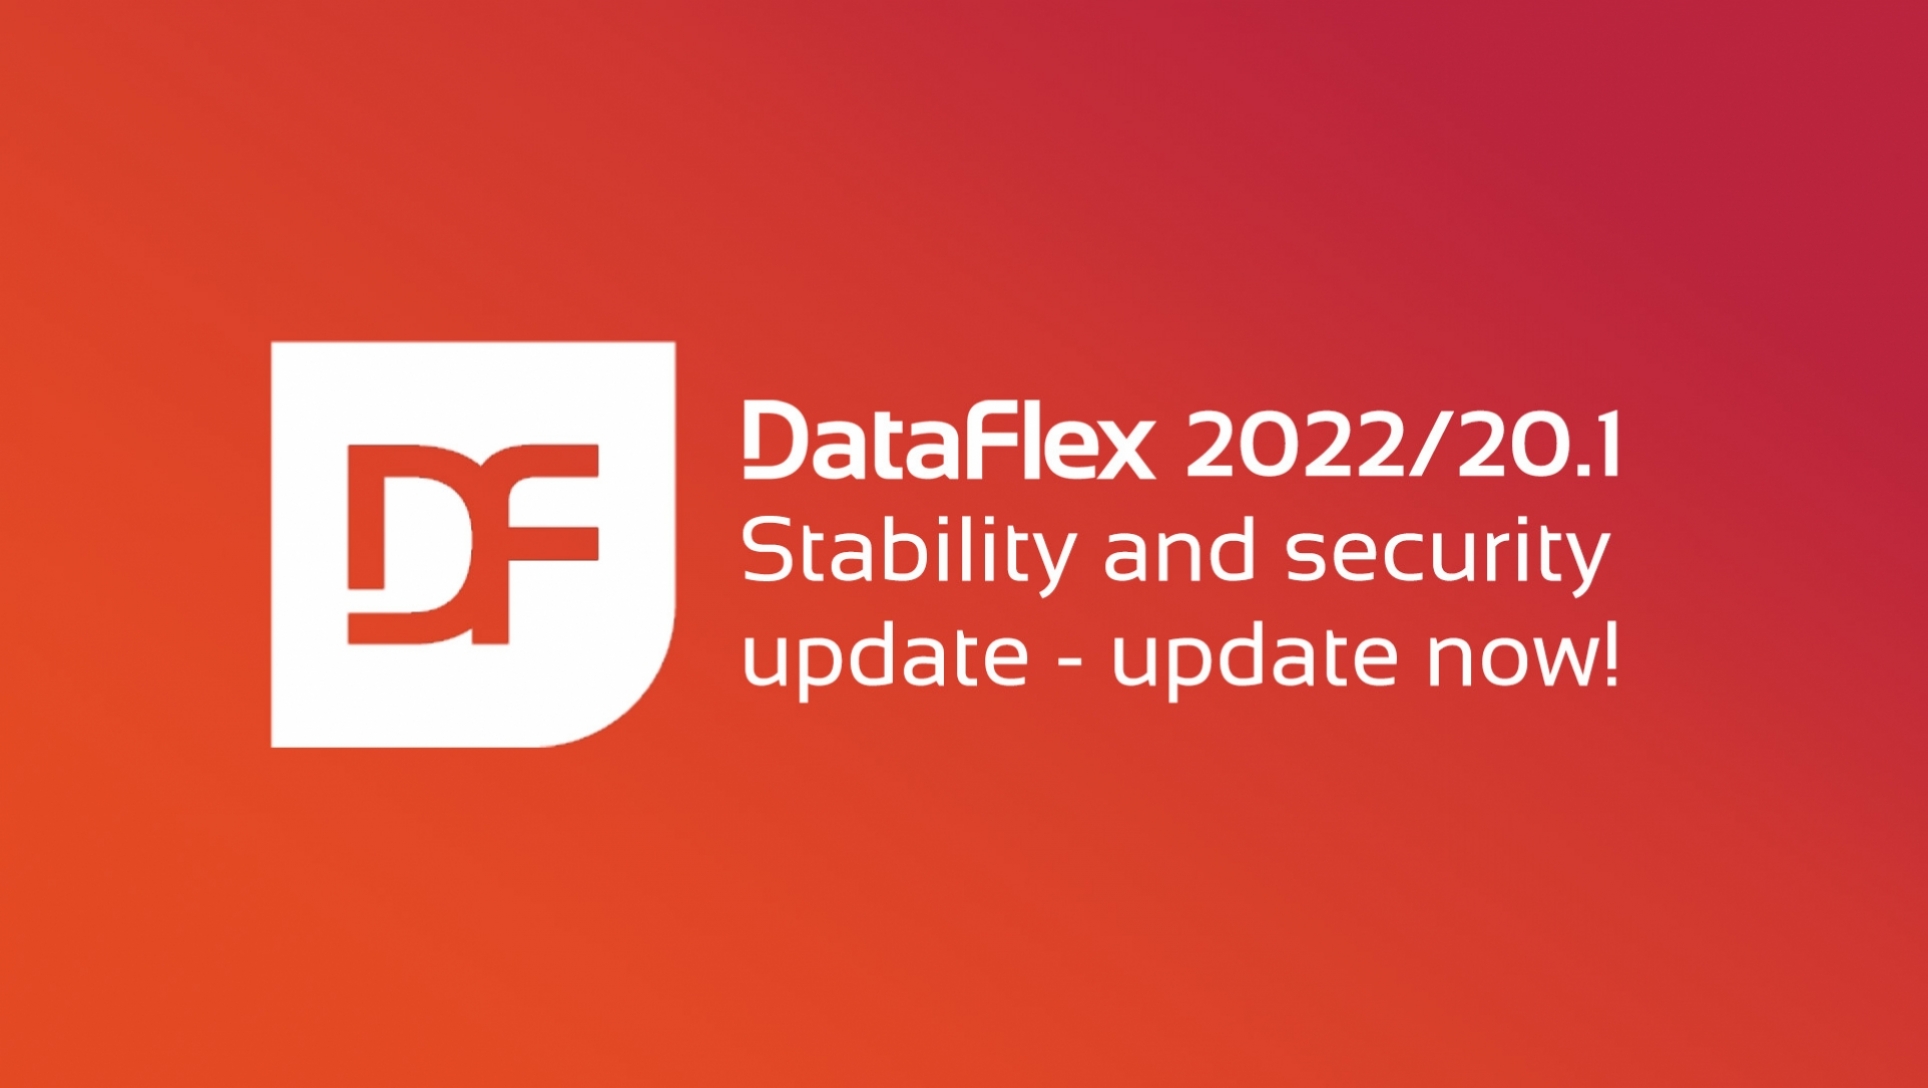 DataFlex 2022 stability and security update available. 